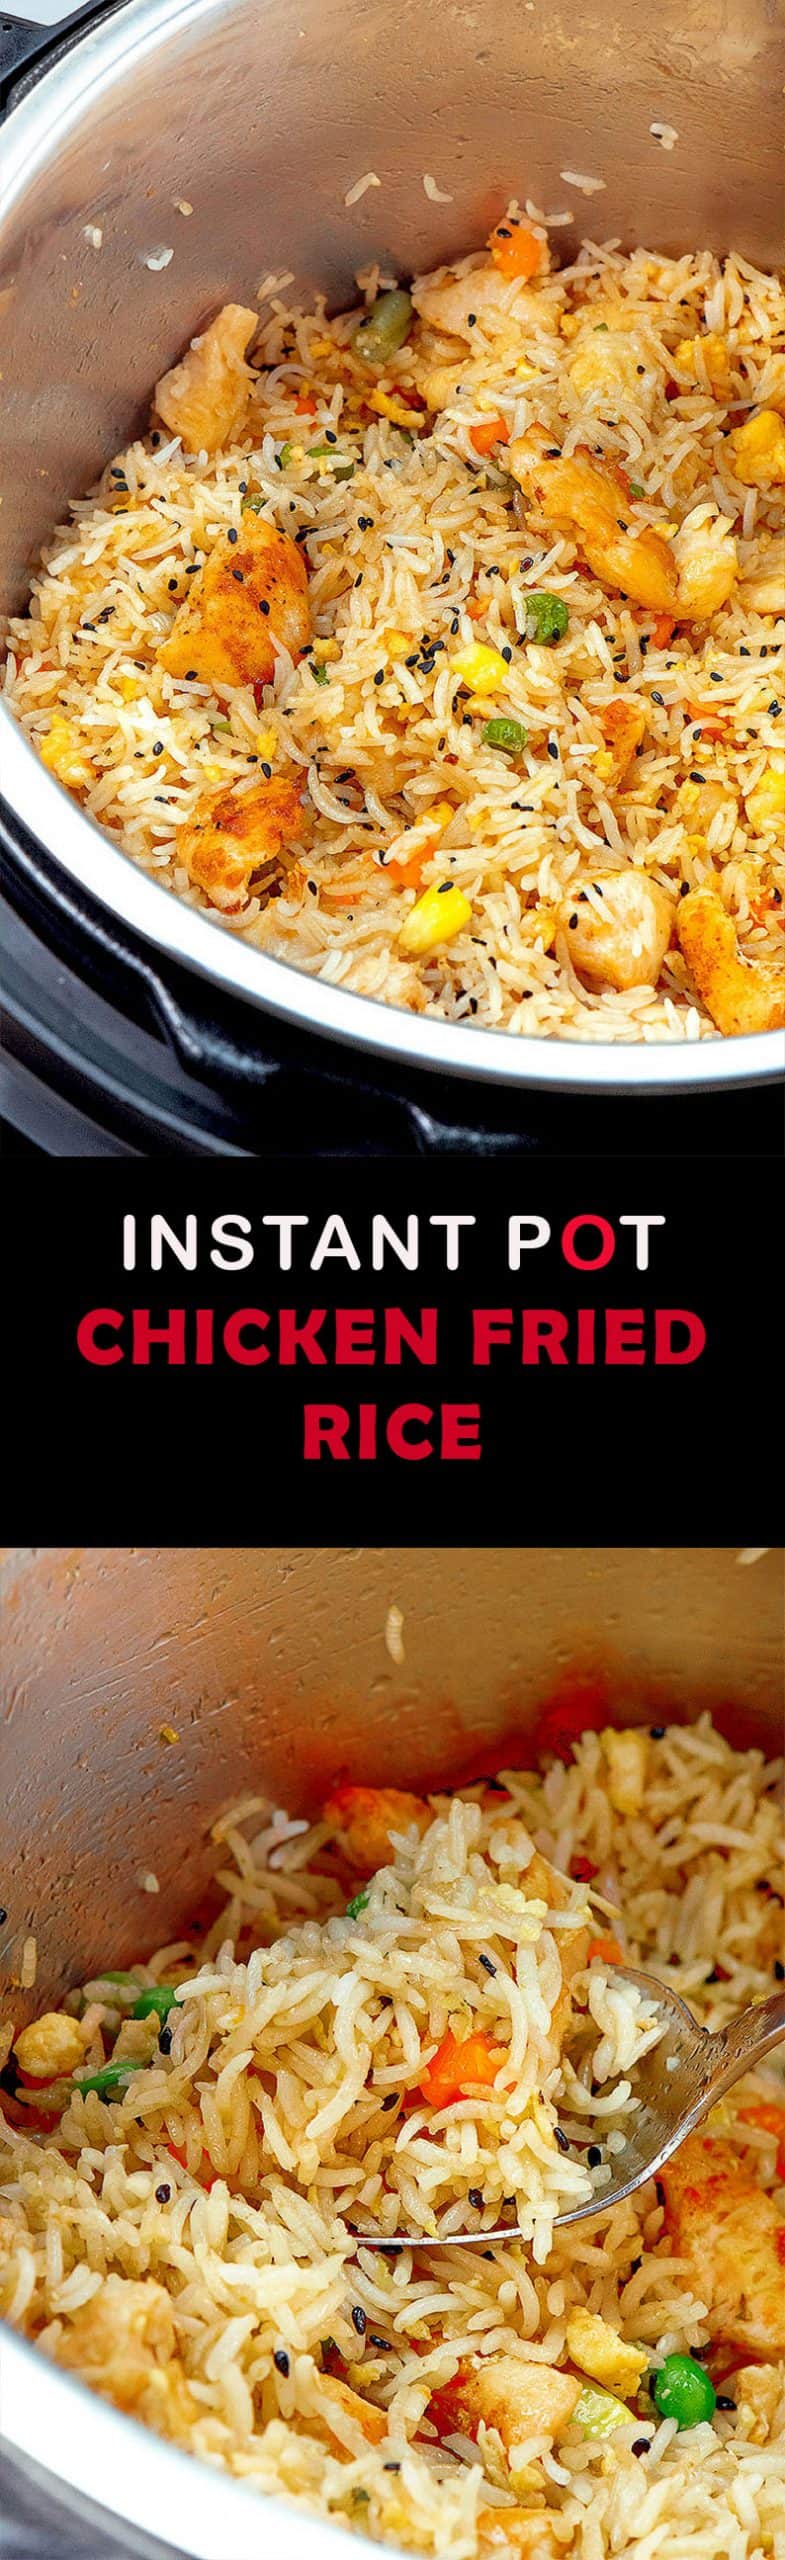 instant-pot-chicken-fried-rice